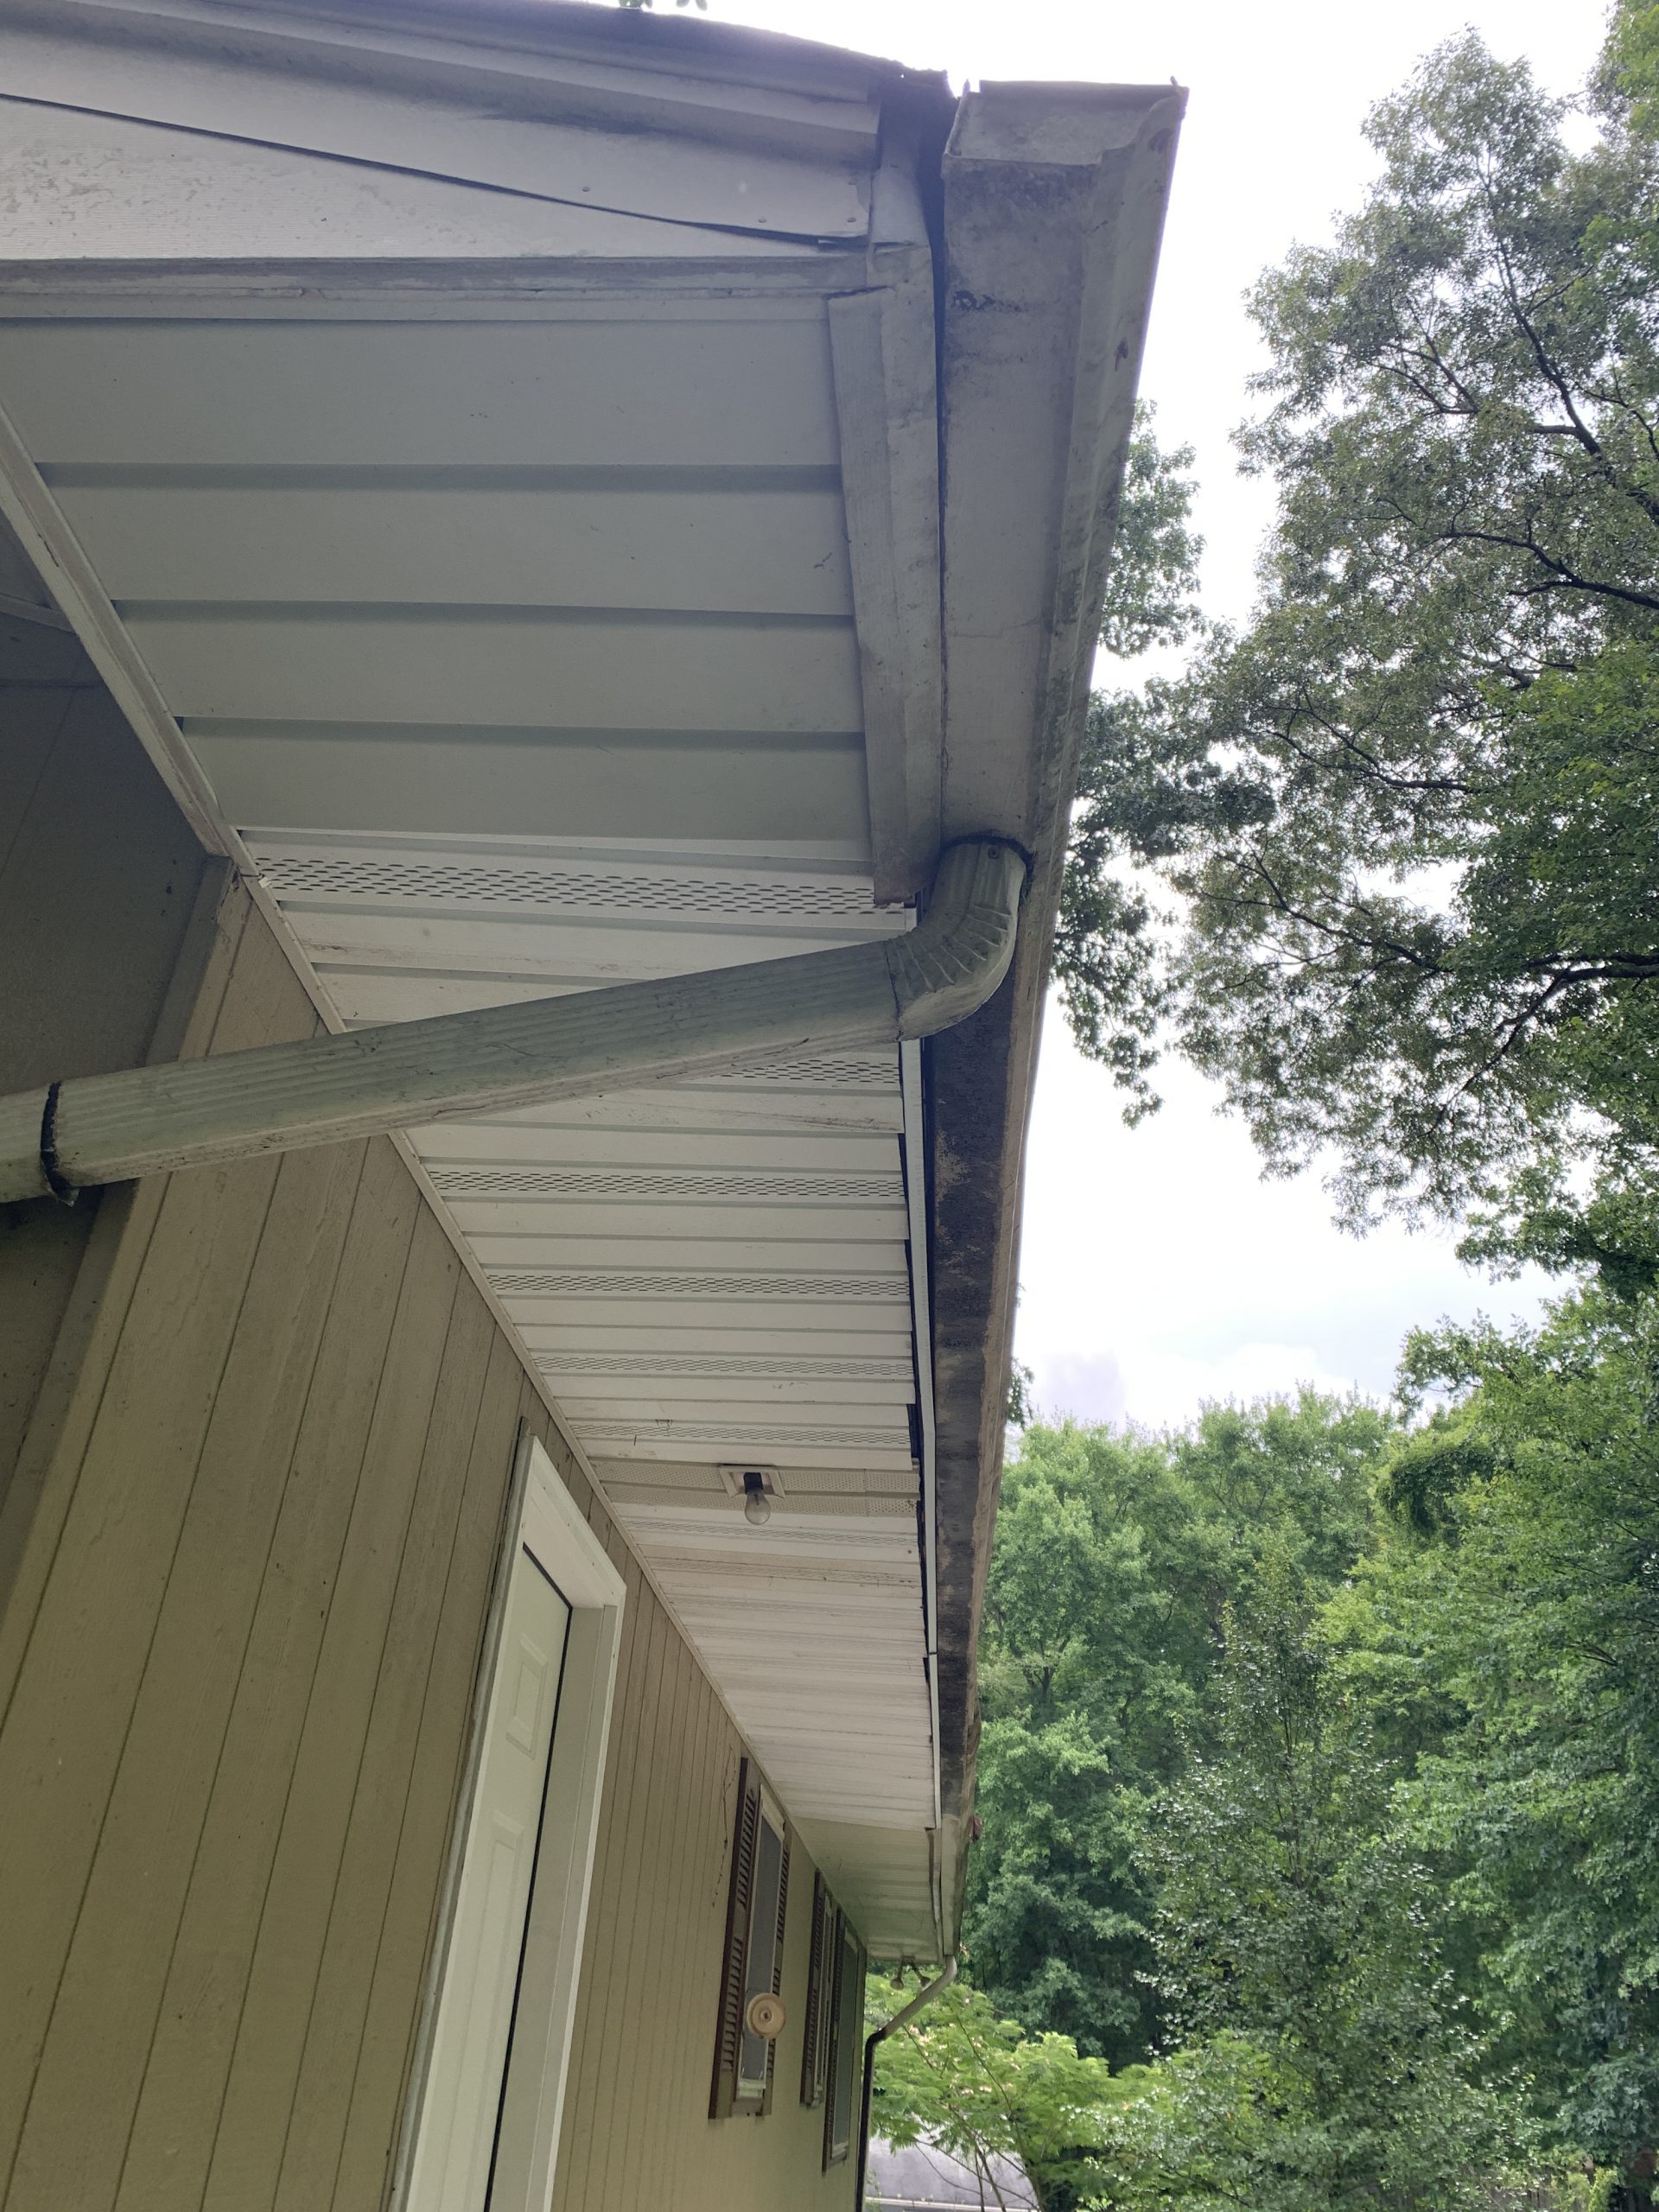 this is a picture of a failing gutter on this home